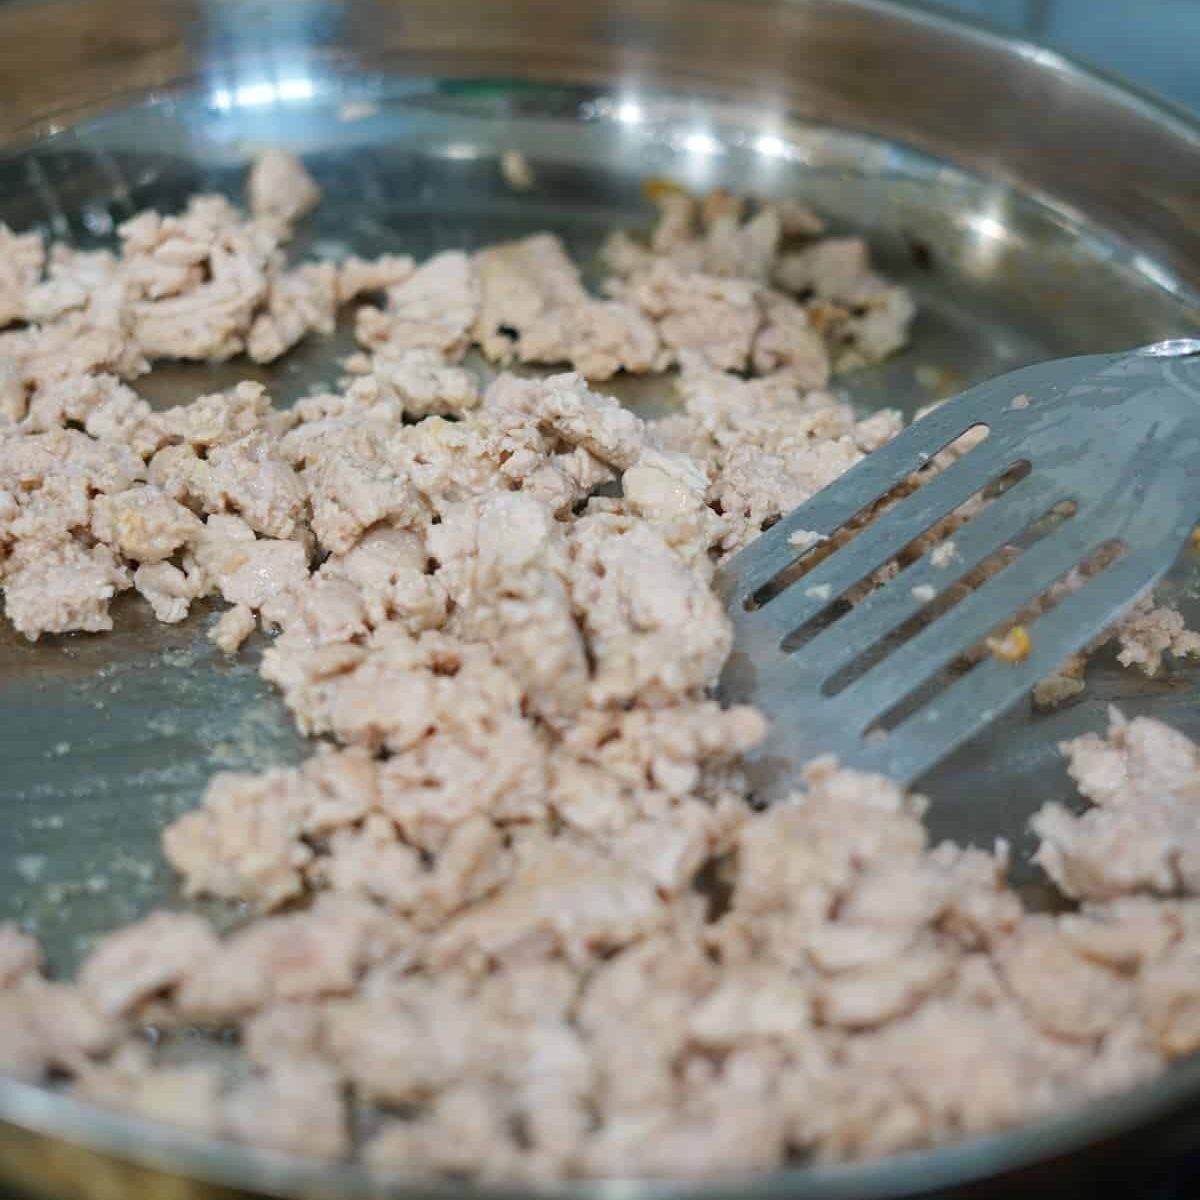 Ground chicken in a metal pan with a spatula.